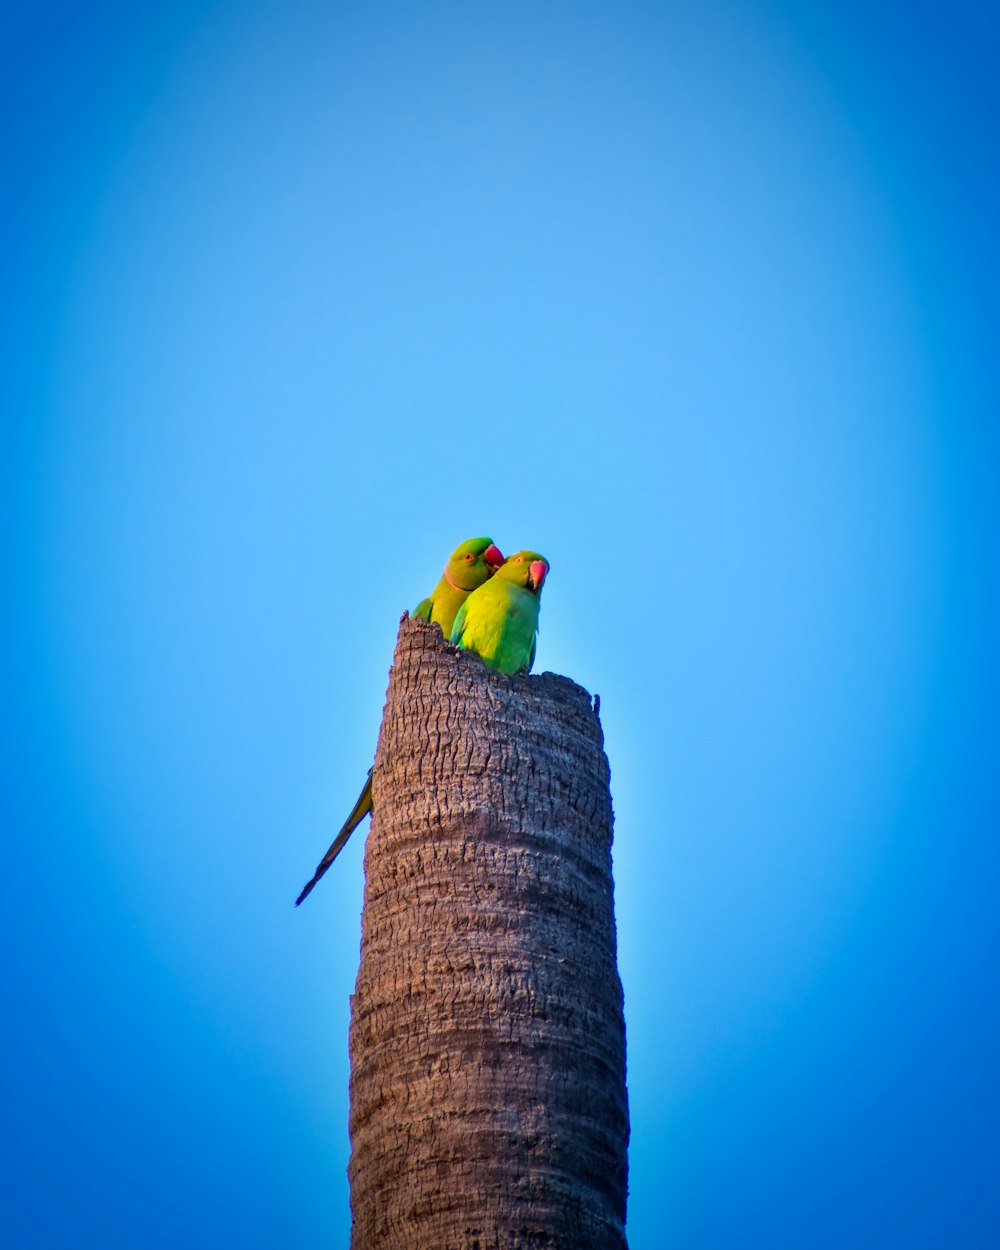 green and yellow bird on brown tree trunk